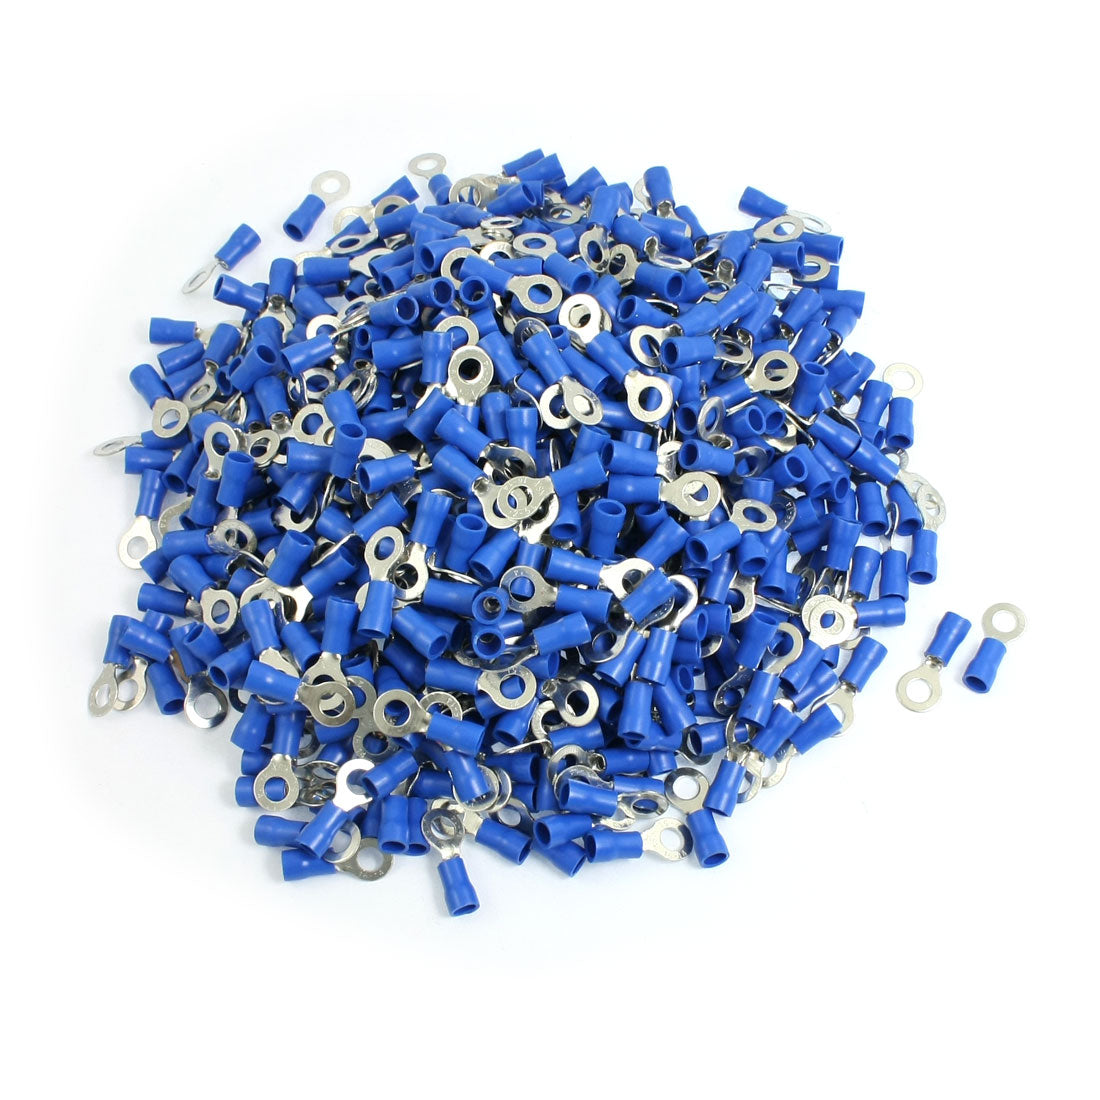 uxcell Uxcell 1000 Pcs RV2-5L AWG 16-14 Blue PVC Sleeve Pre Insulated Ring Terminals Connector